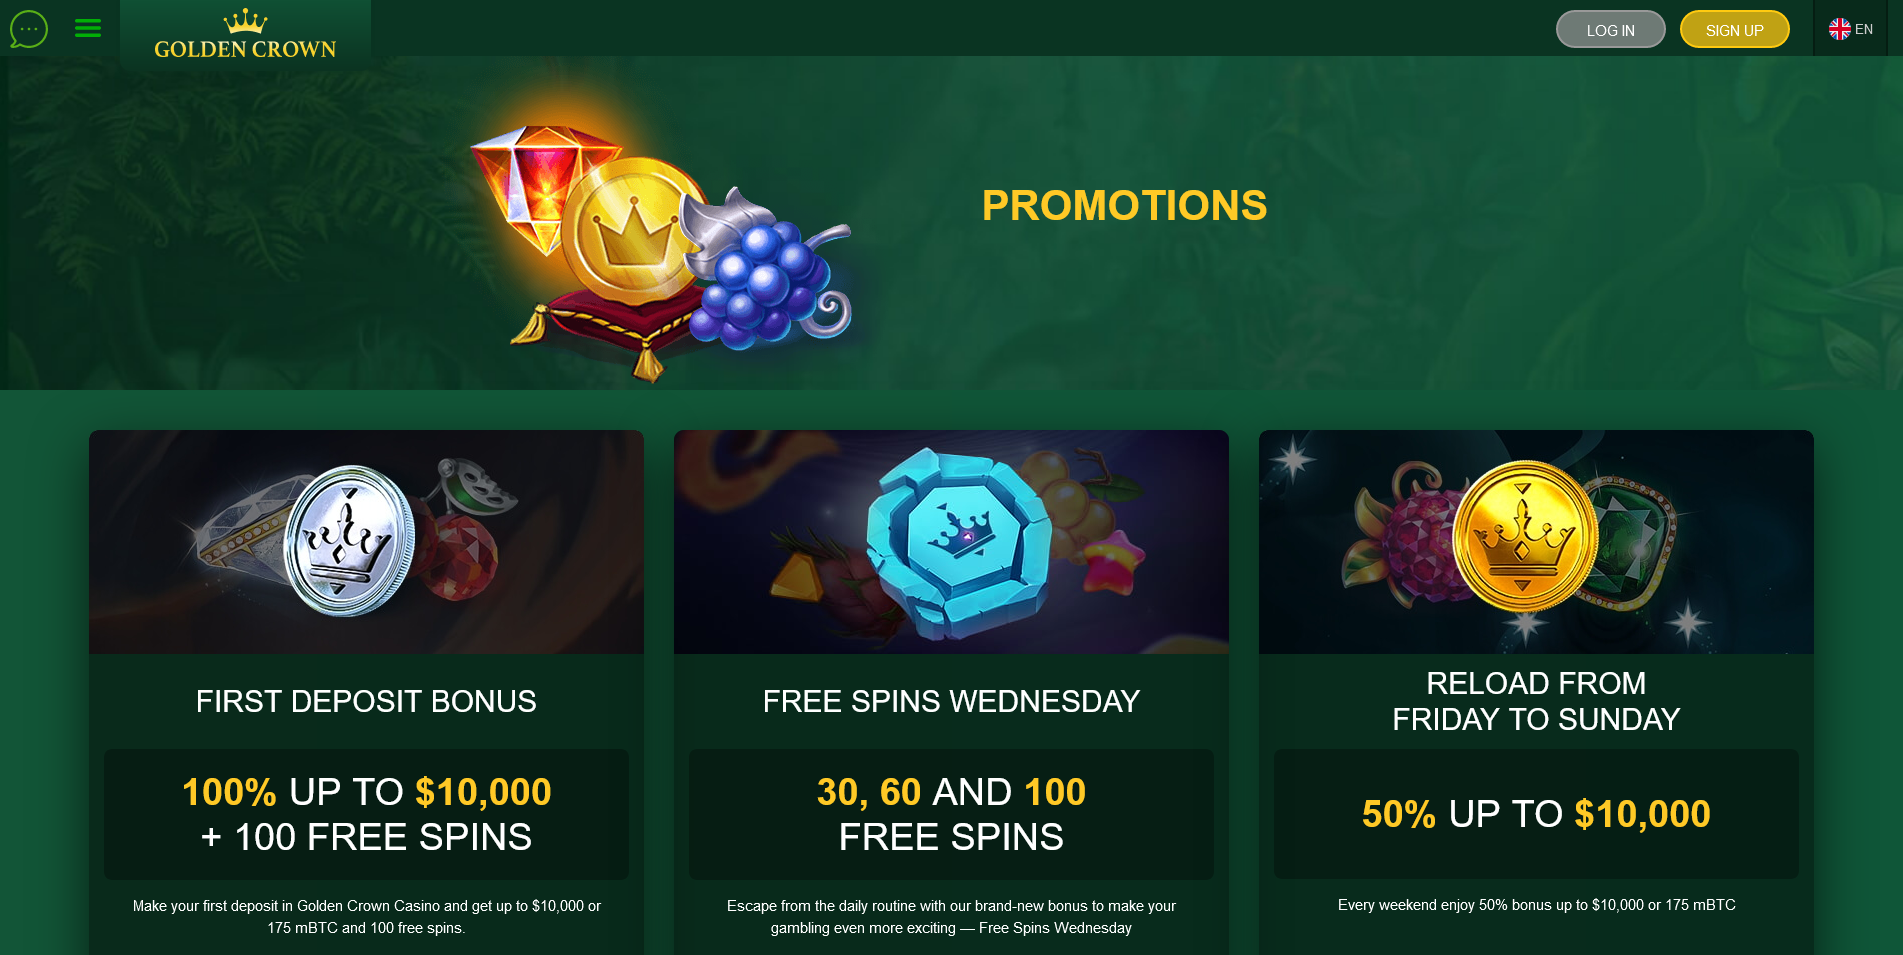 Screenshot of the Golden Crown Casino promotions page